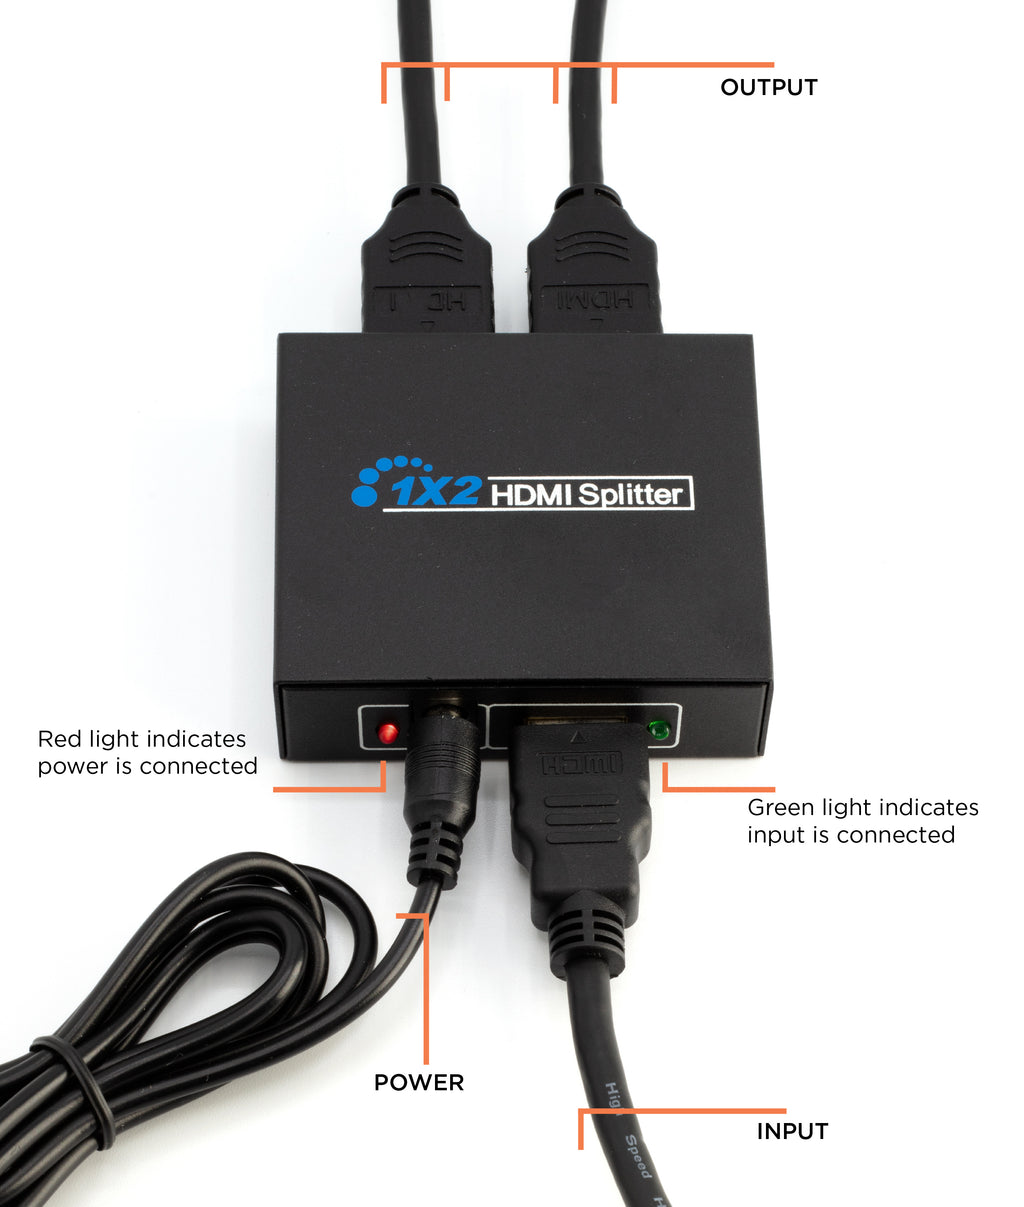 1X2 HDMI Splitter Powered Kit - 2 Port 1 in 2 Out - 2 HDMI Powe – THE CIMPLE CO